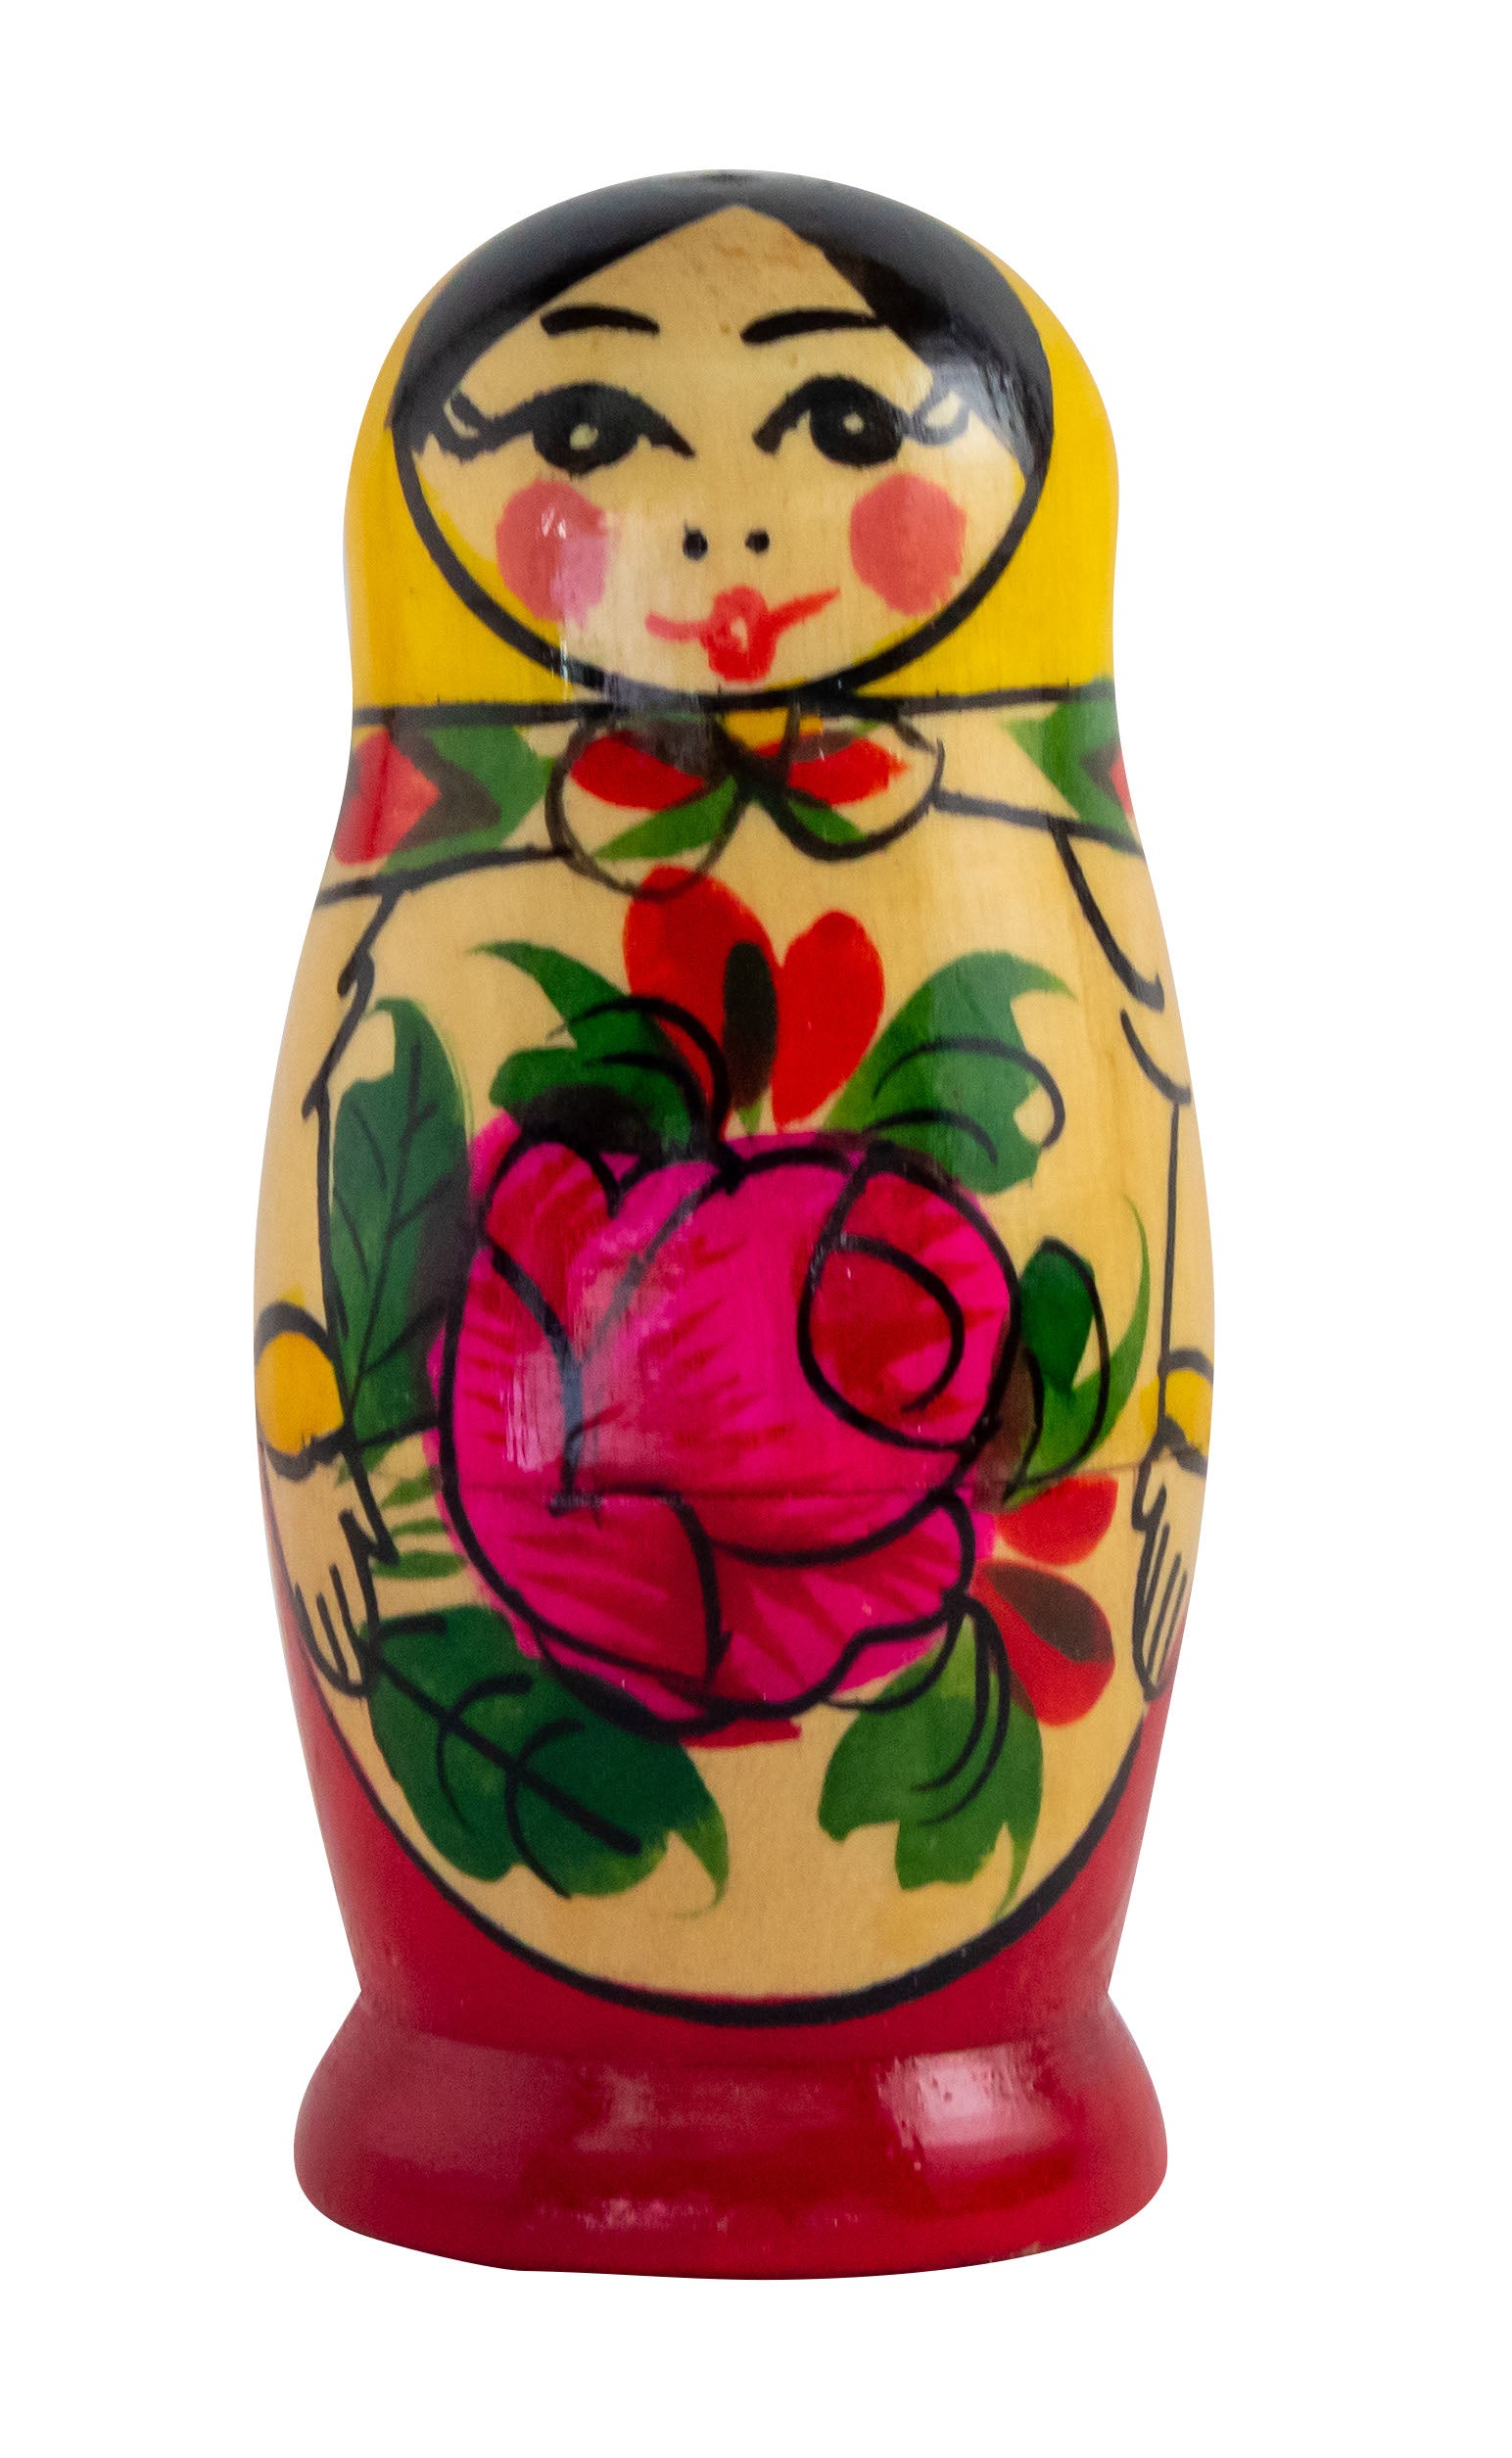 4 Piece Wooden Nesting Doll - Traditional 3.4"